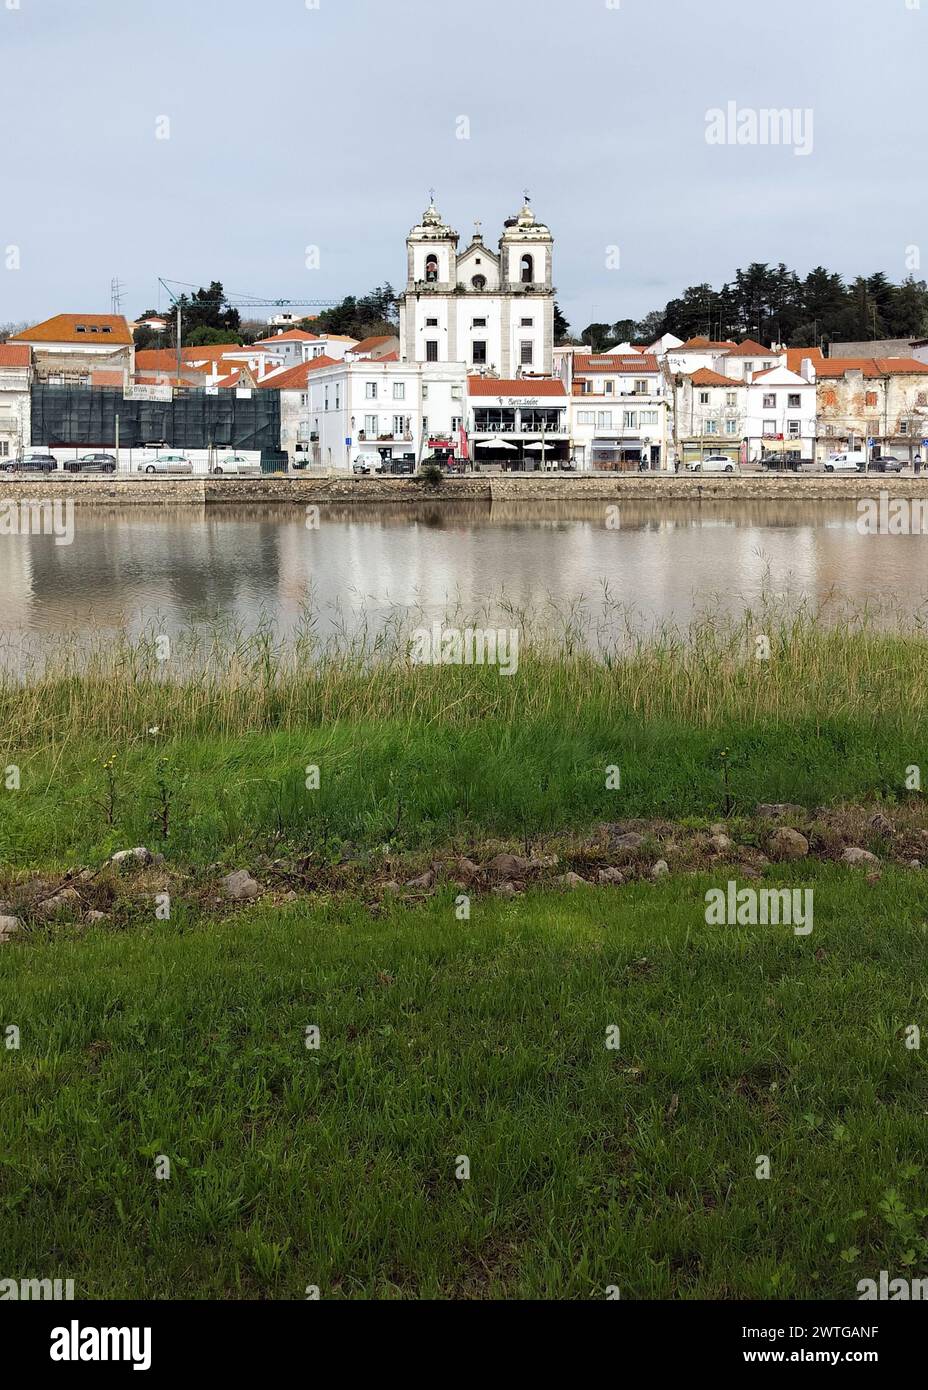 View of the town historic center across the River Sado, grassy left bank of the river in the foreground, Alcacer do Sal, Portugal Stock Photo